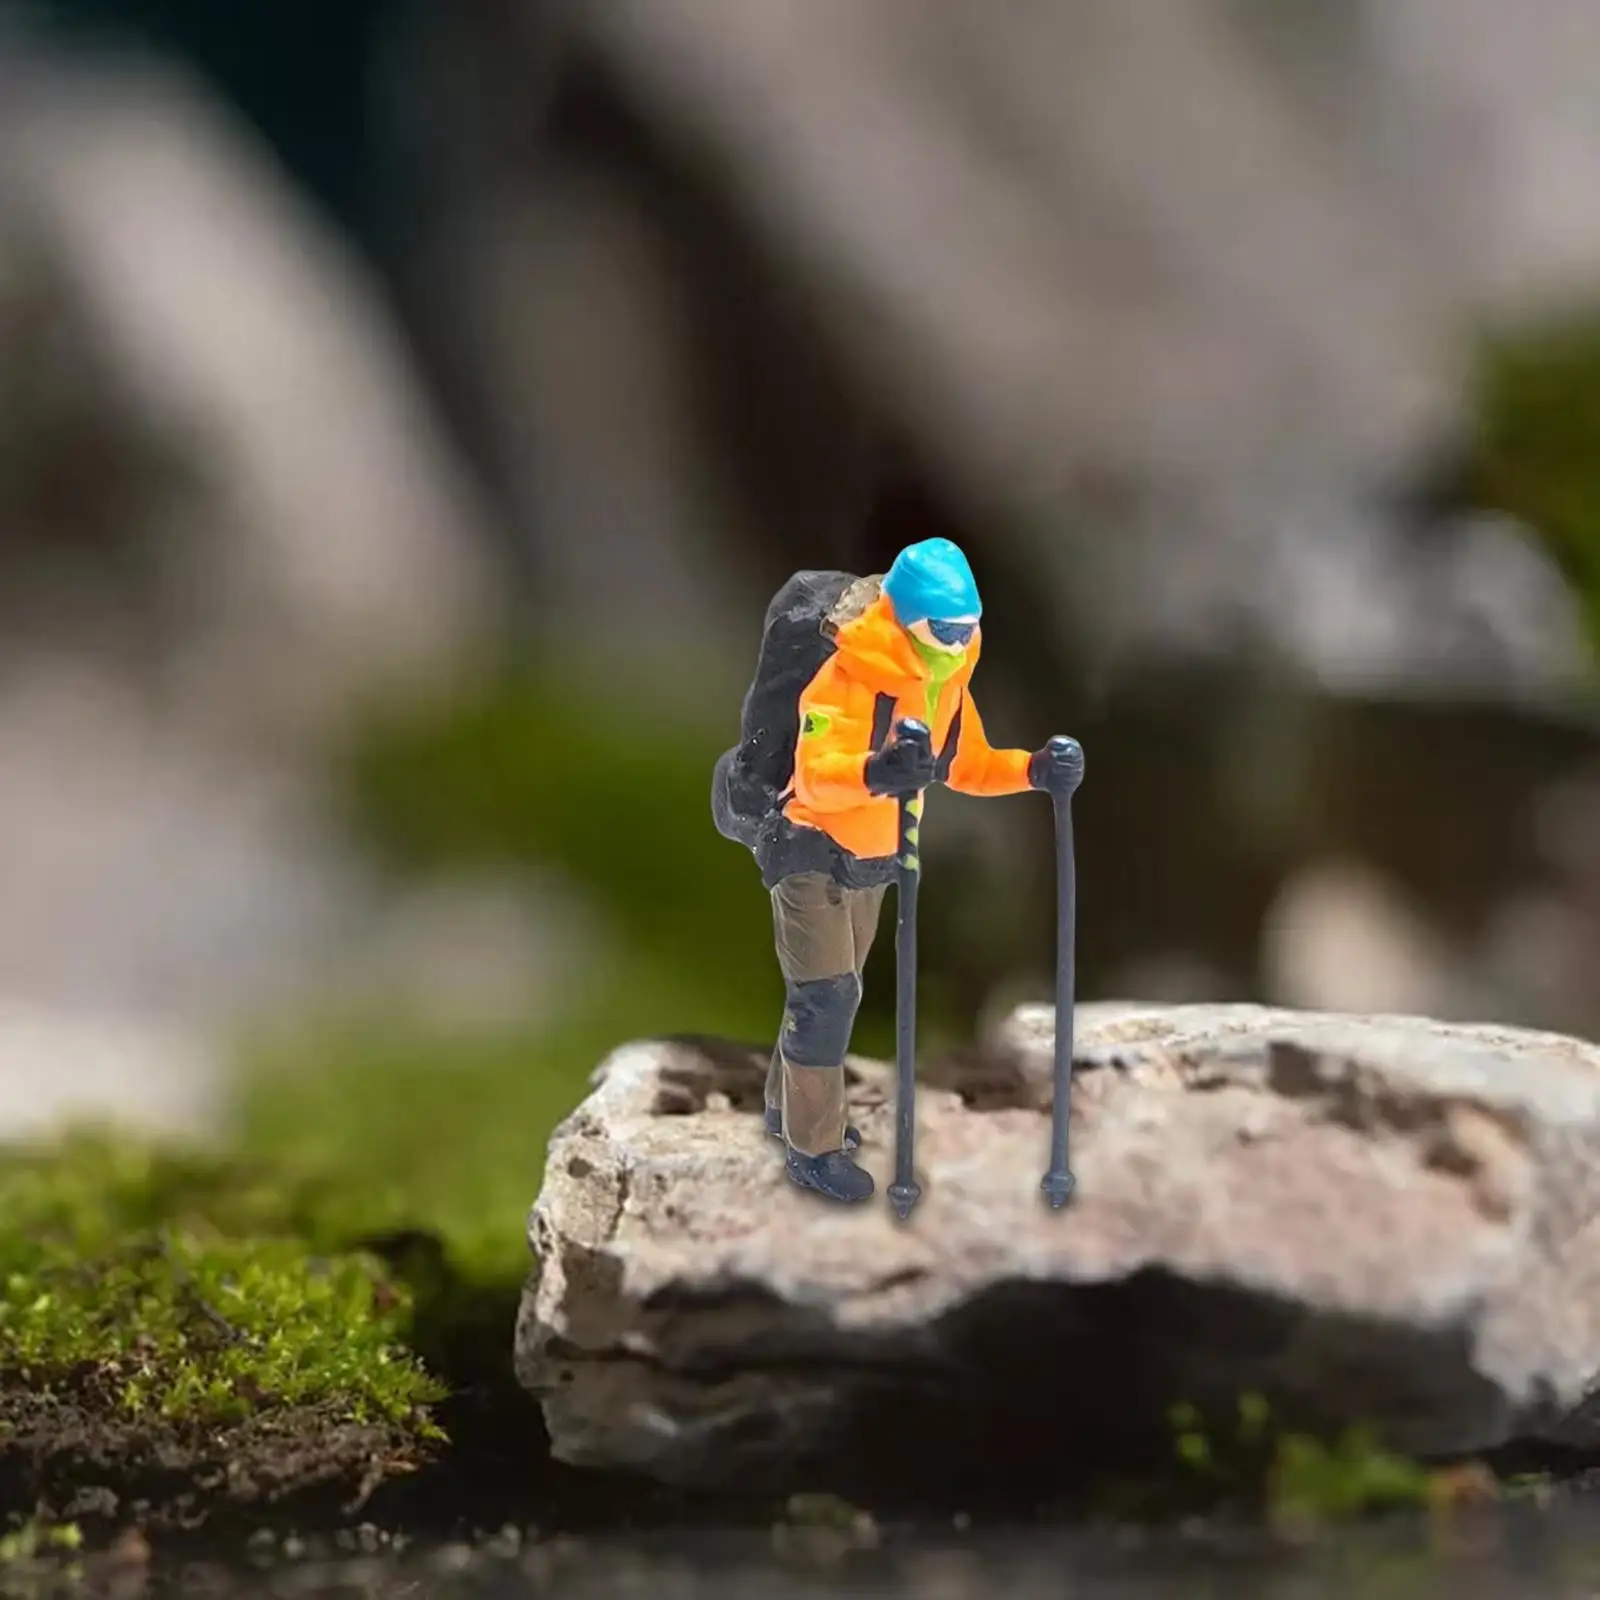 Realistic 1/87 Climbing People Figurines Mountaineering People Figures for Layout Decor